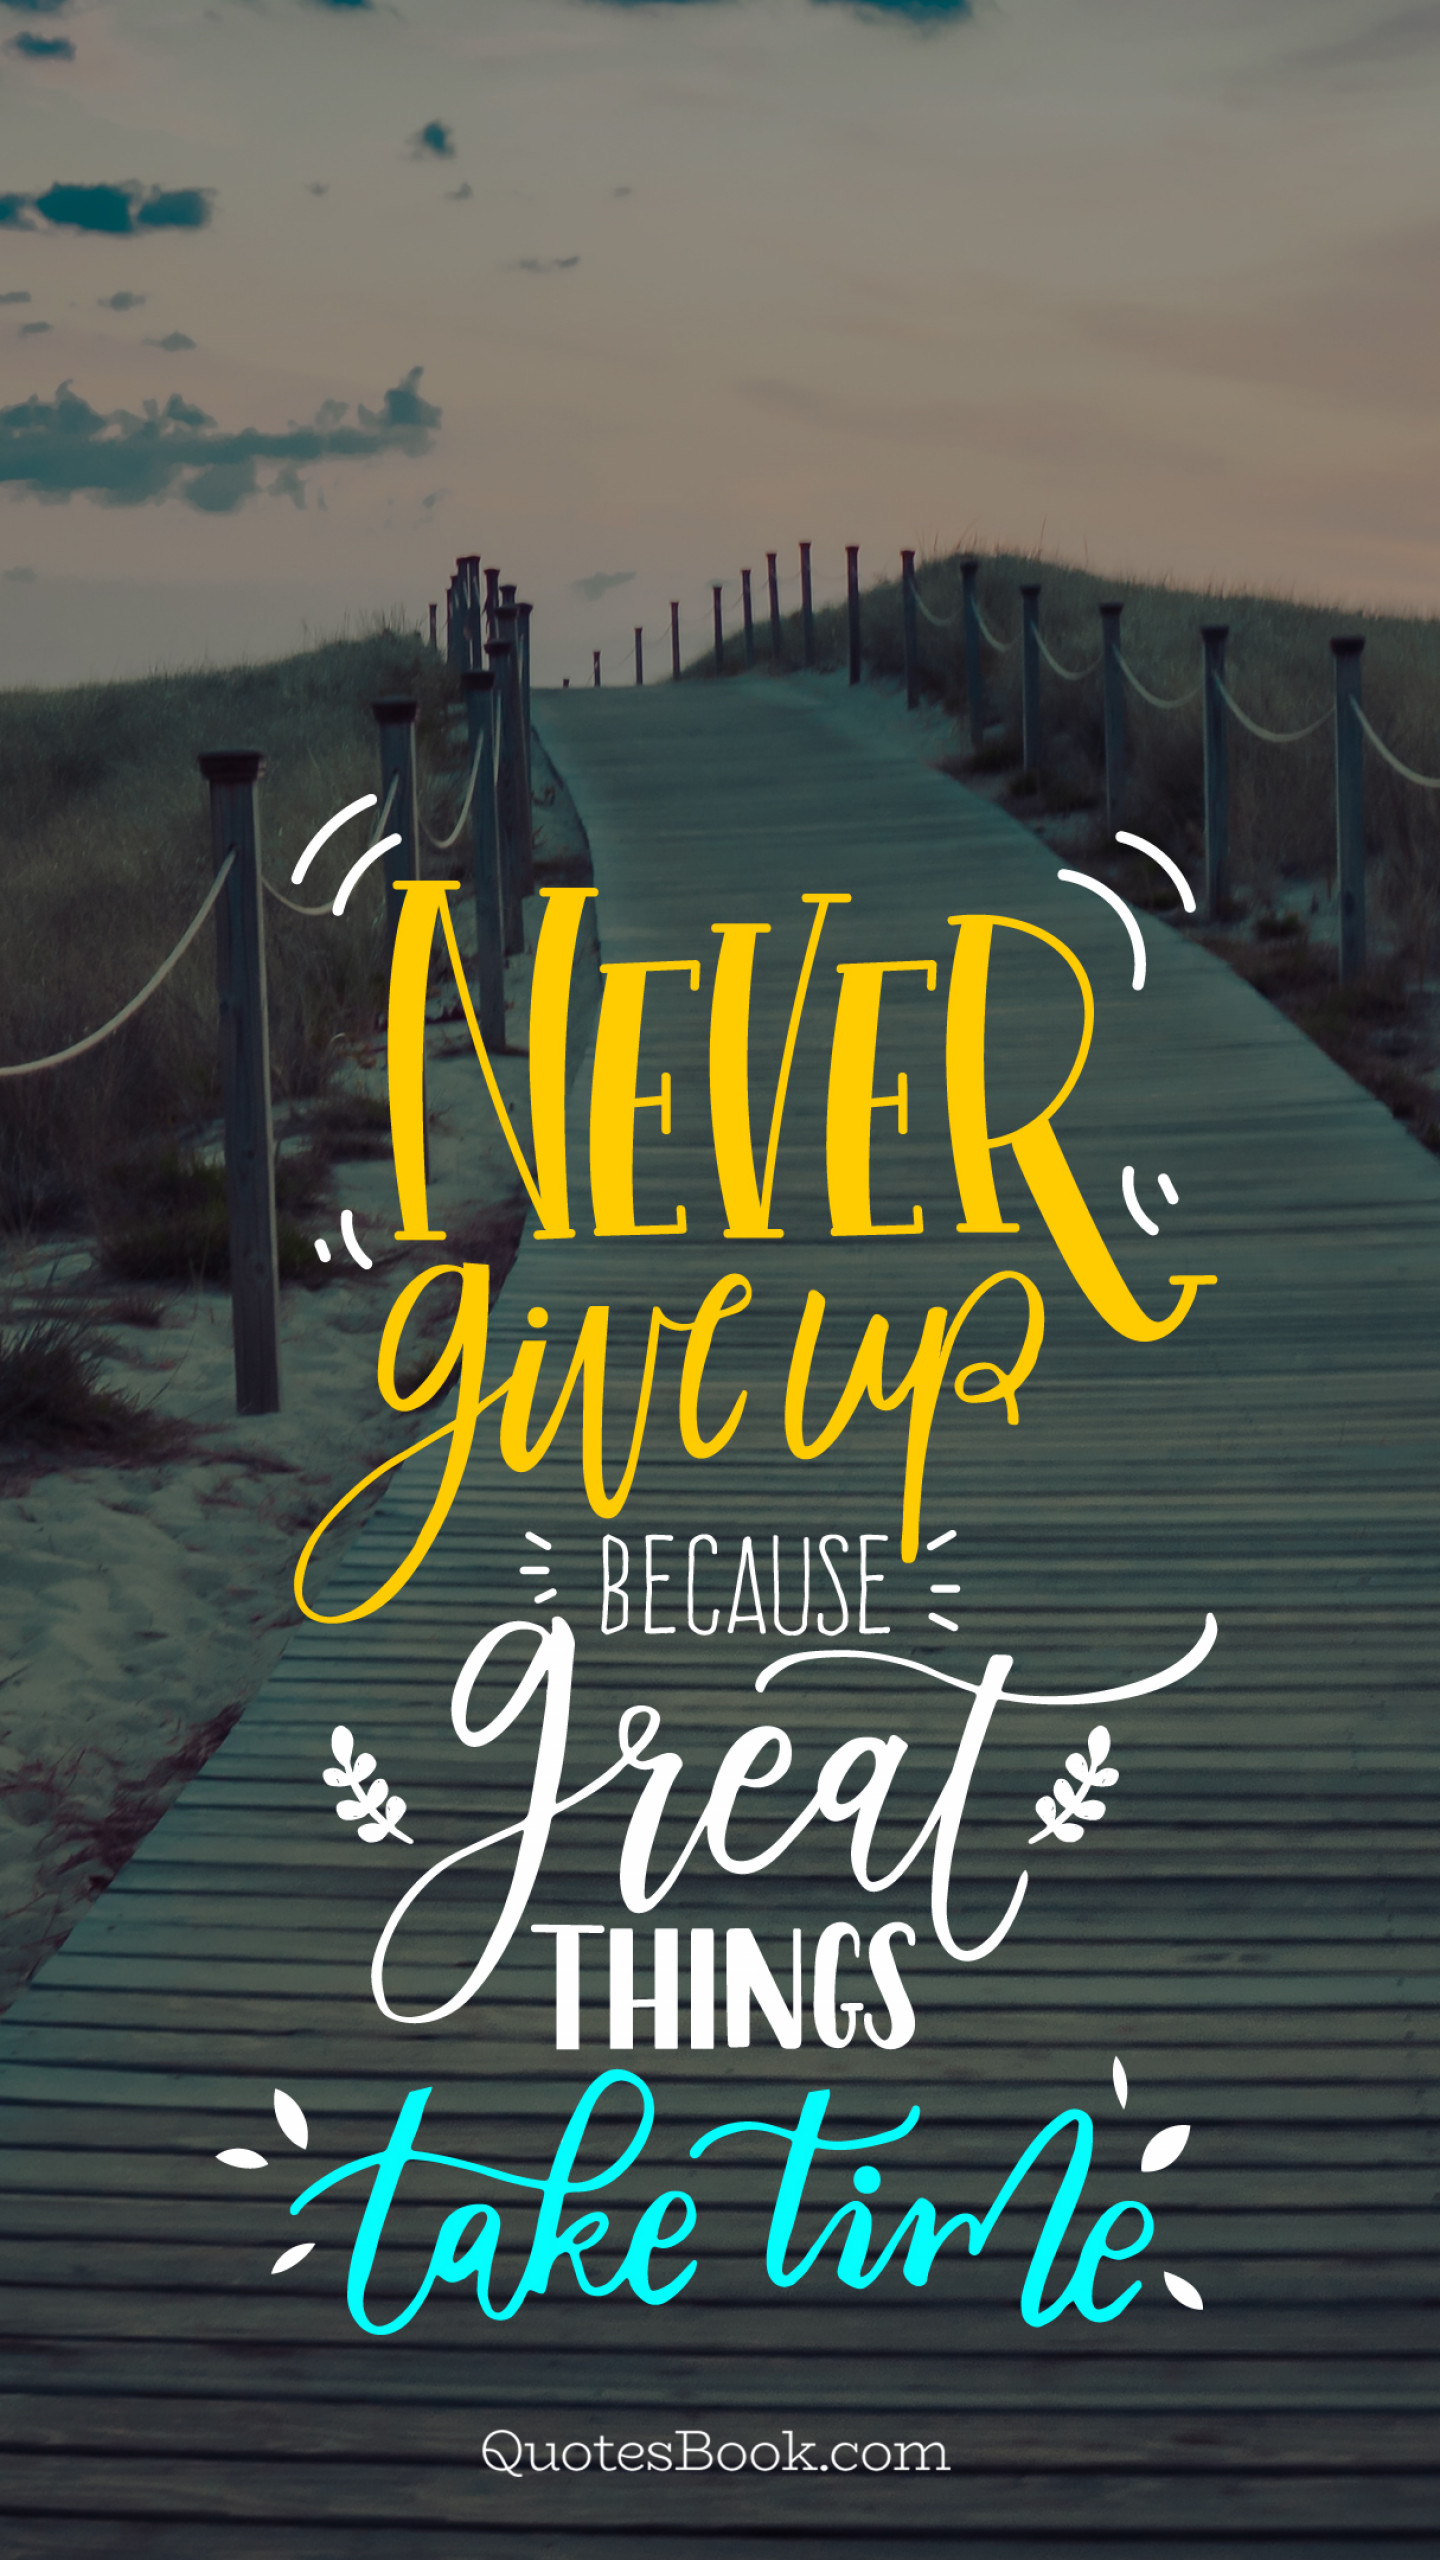 Never give up because great things take time QuotesBook